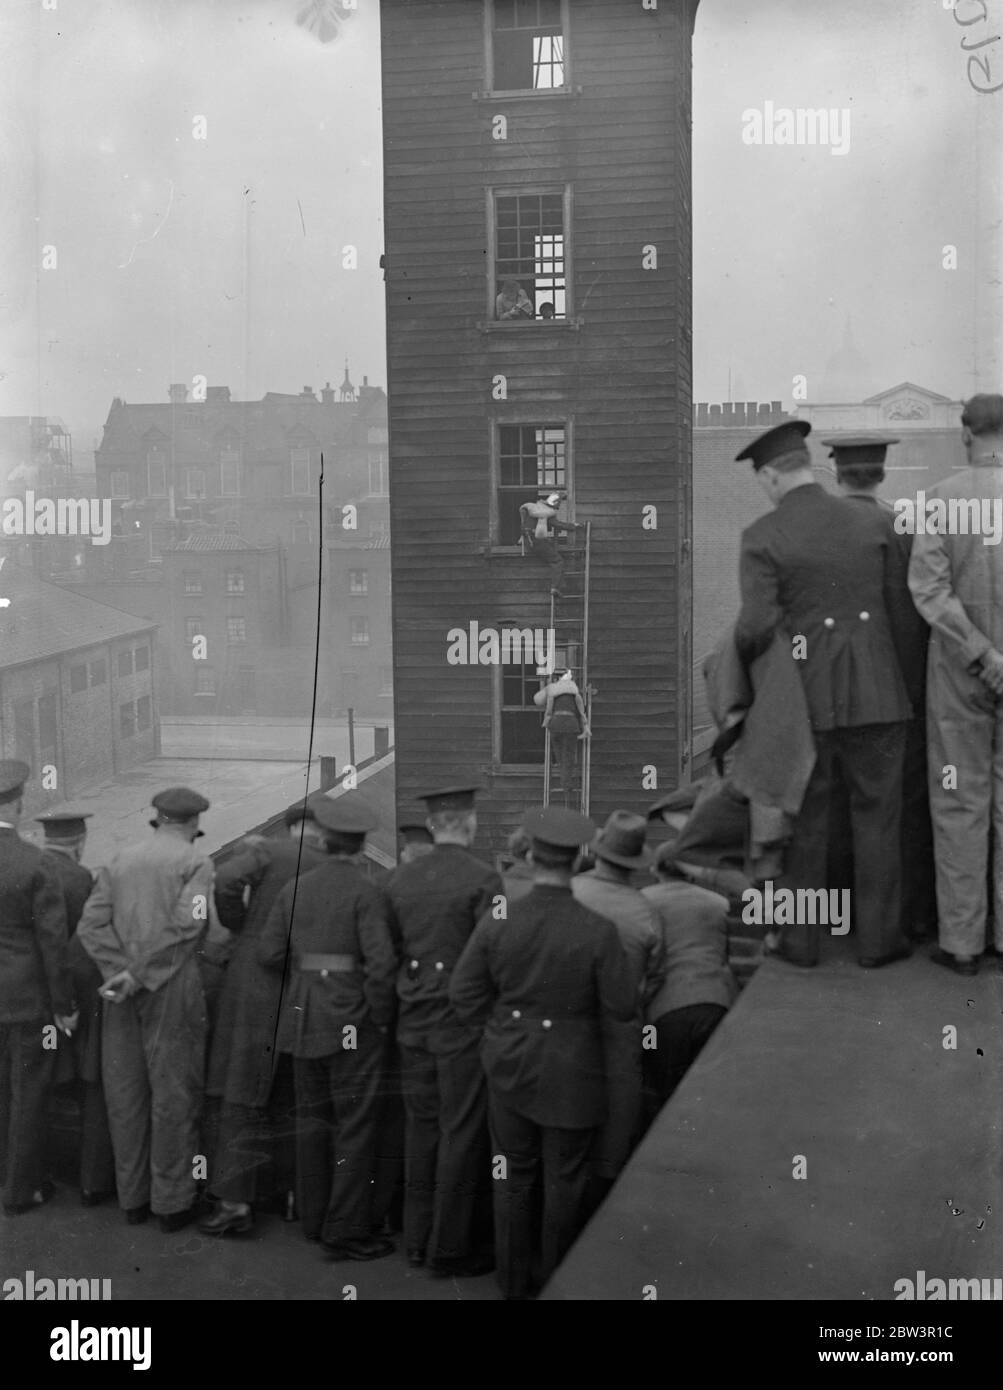 Rescues at finals of Fire Brigade escape competition . the finals of the London Fire Brigade escape competition took place at the brigade headquarters , Southwark . Photo shows , rescues from a burning building during the competition . 24 April 1936 Stock Photo